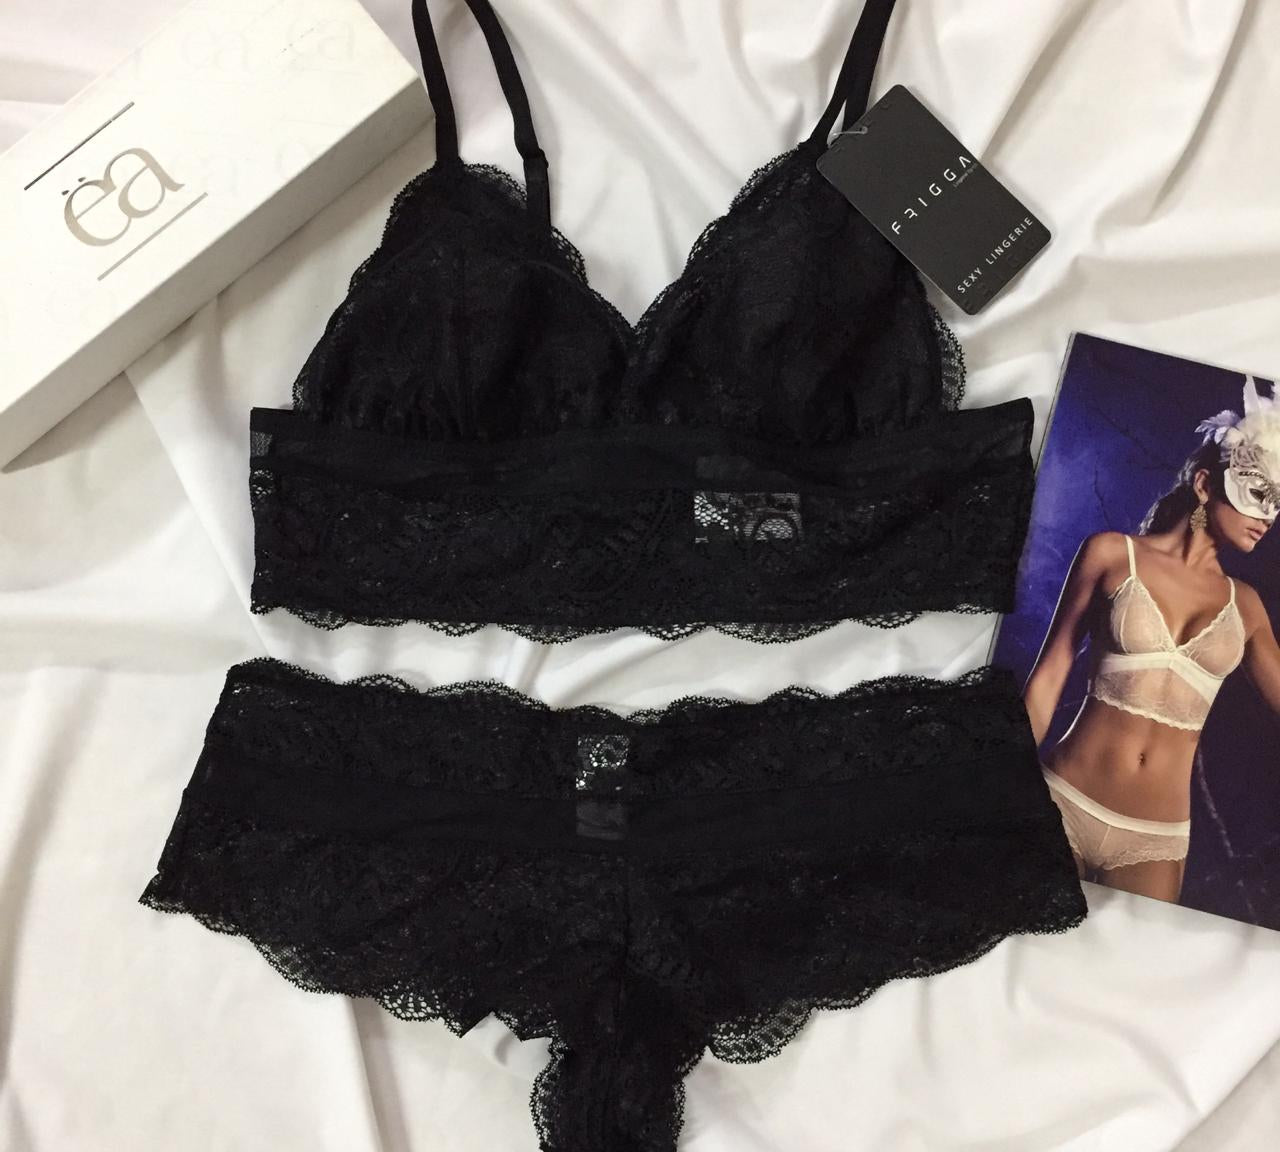 Comfortable & Chic Cheeky Panty